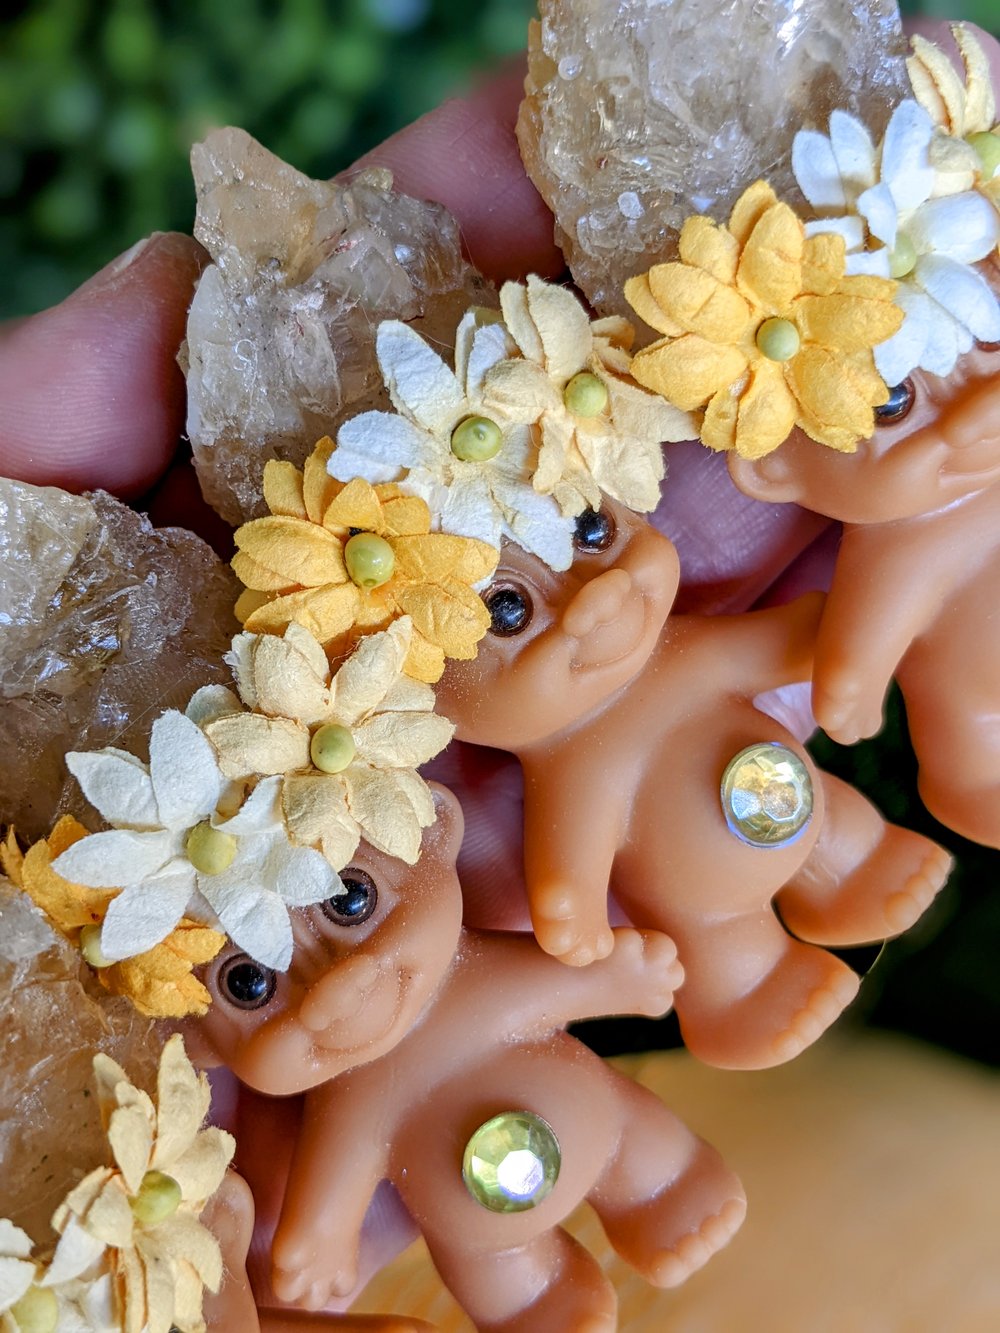 Citrine "Golden Amethyst" Crystal Troll Shorty with Mulberry Flower Crown 3.5"